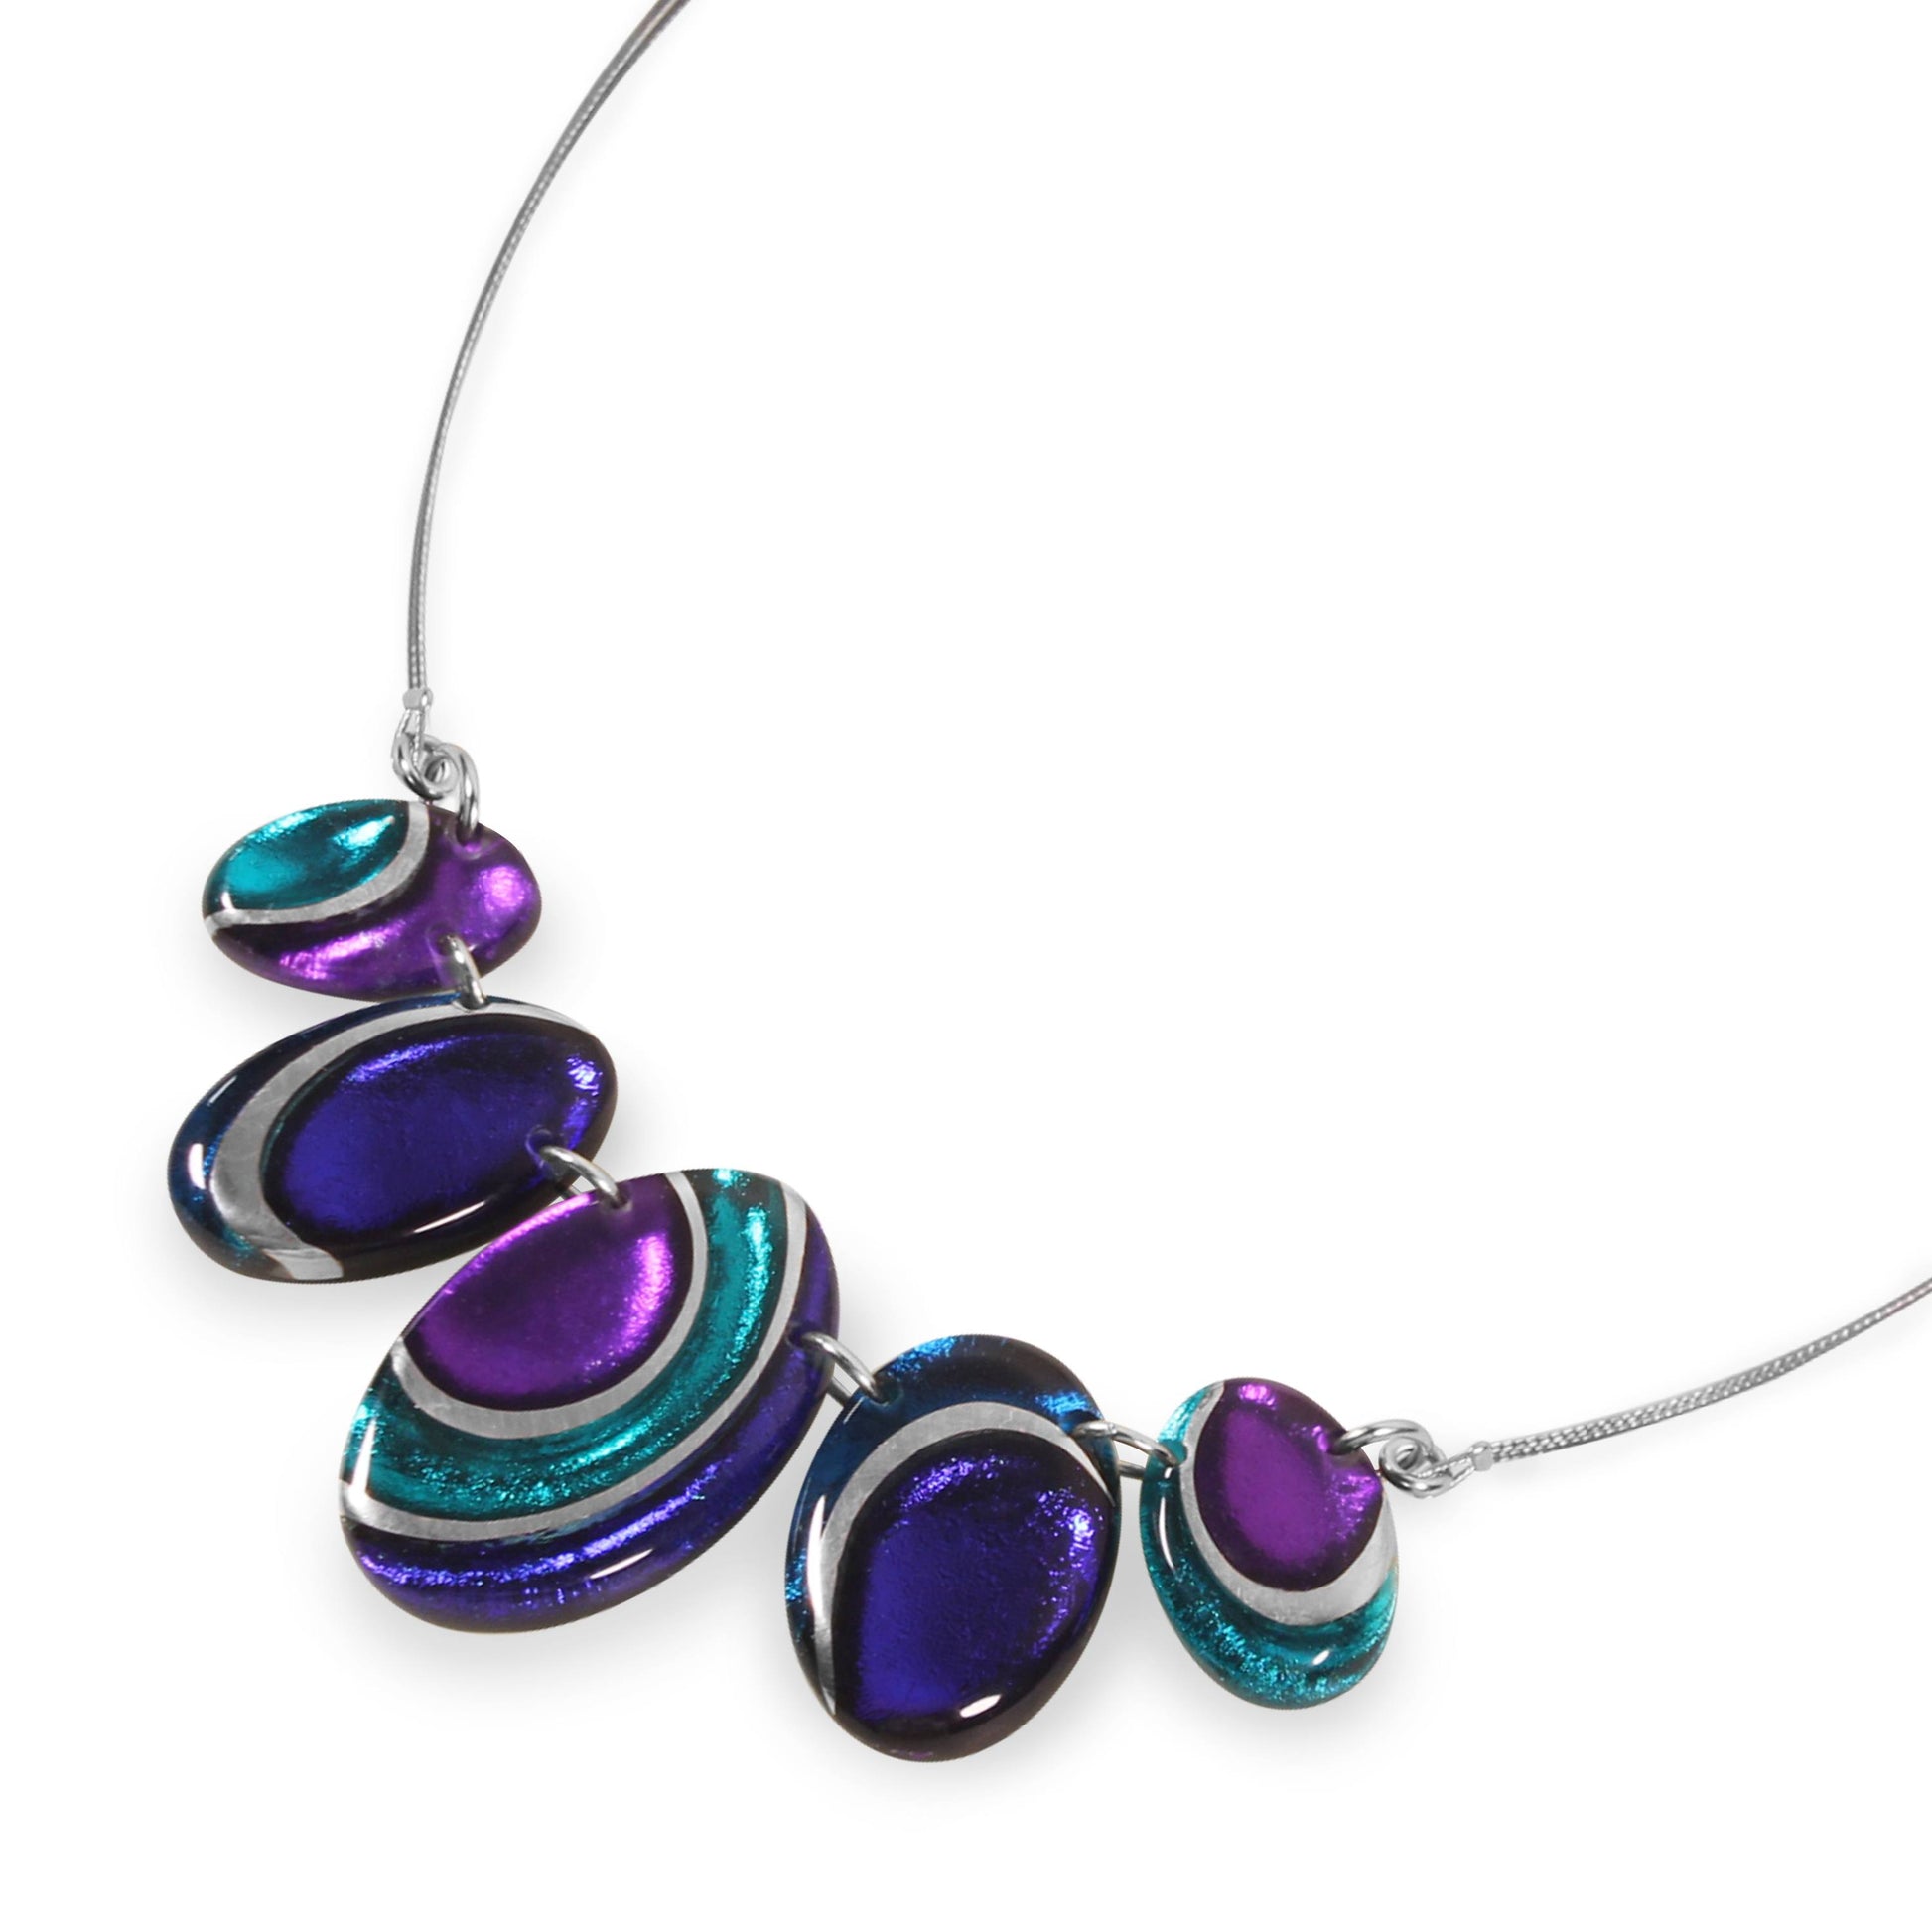 Peacock Oval Swirl Shiny Necklace